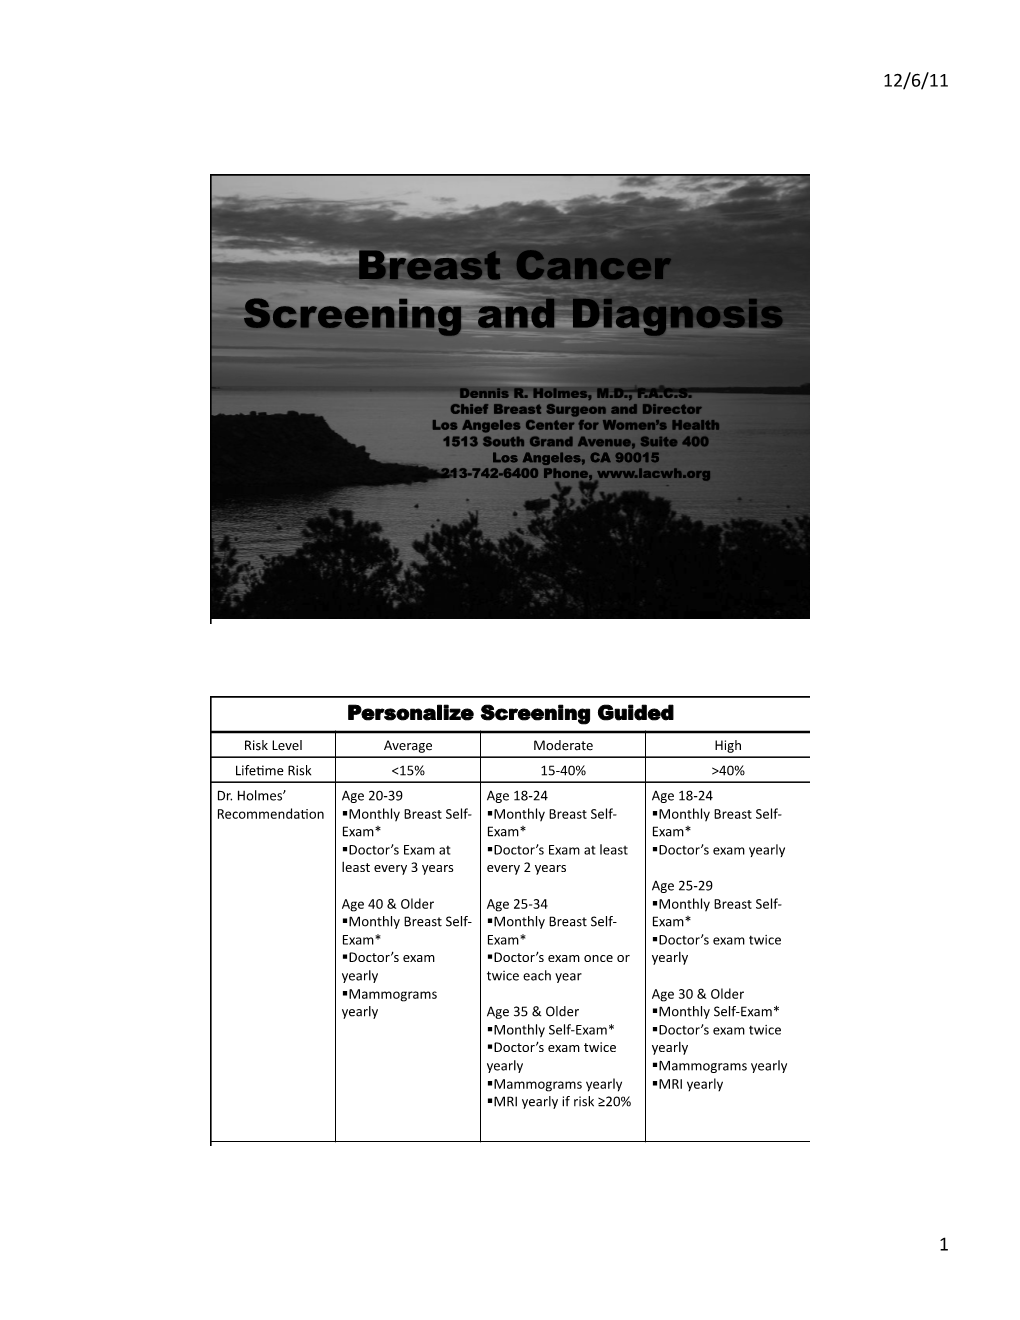 Breast Cancer Screening, Detection, and Needle Biopsy